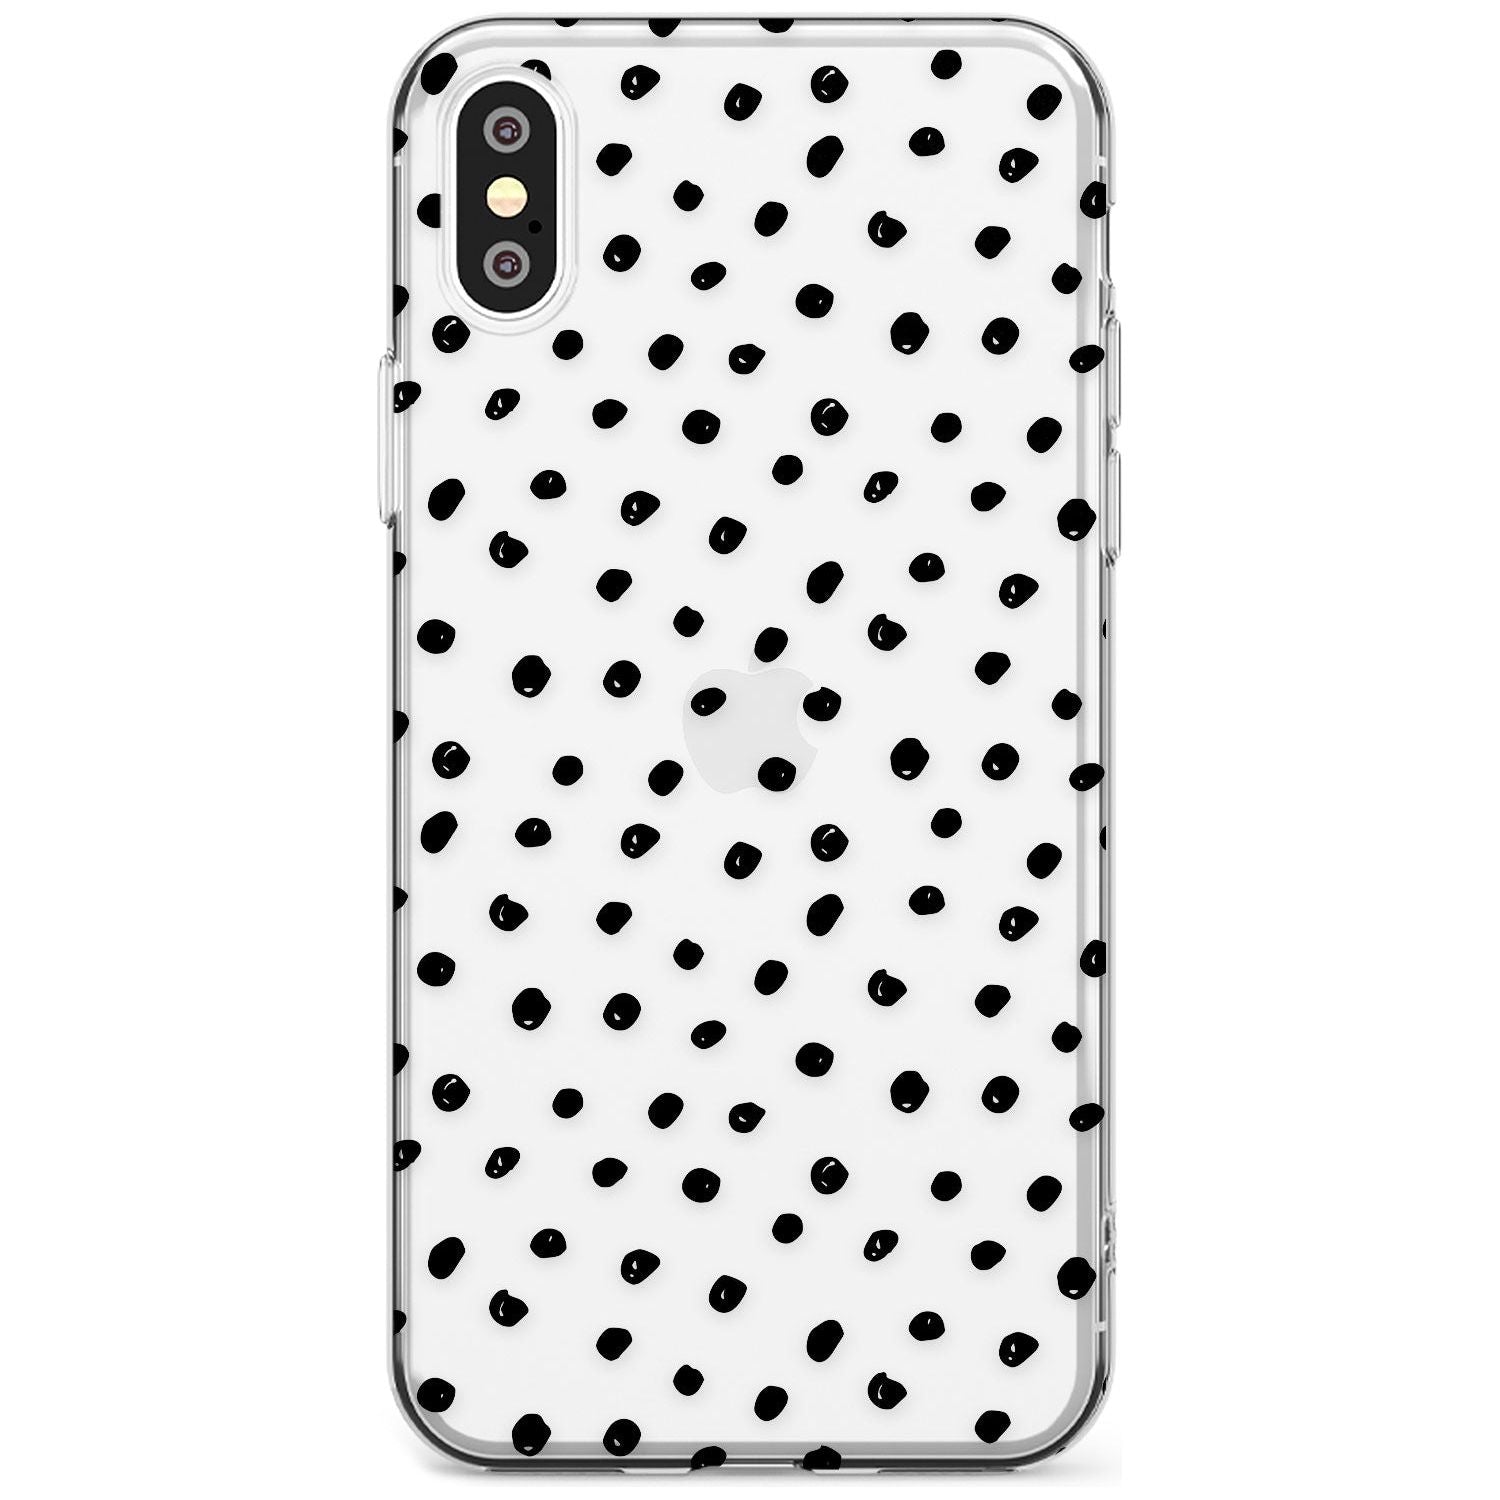 Messy Black Dot Pattern Black Impact Phone Case for iPhone X XS Max XR